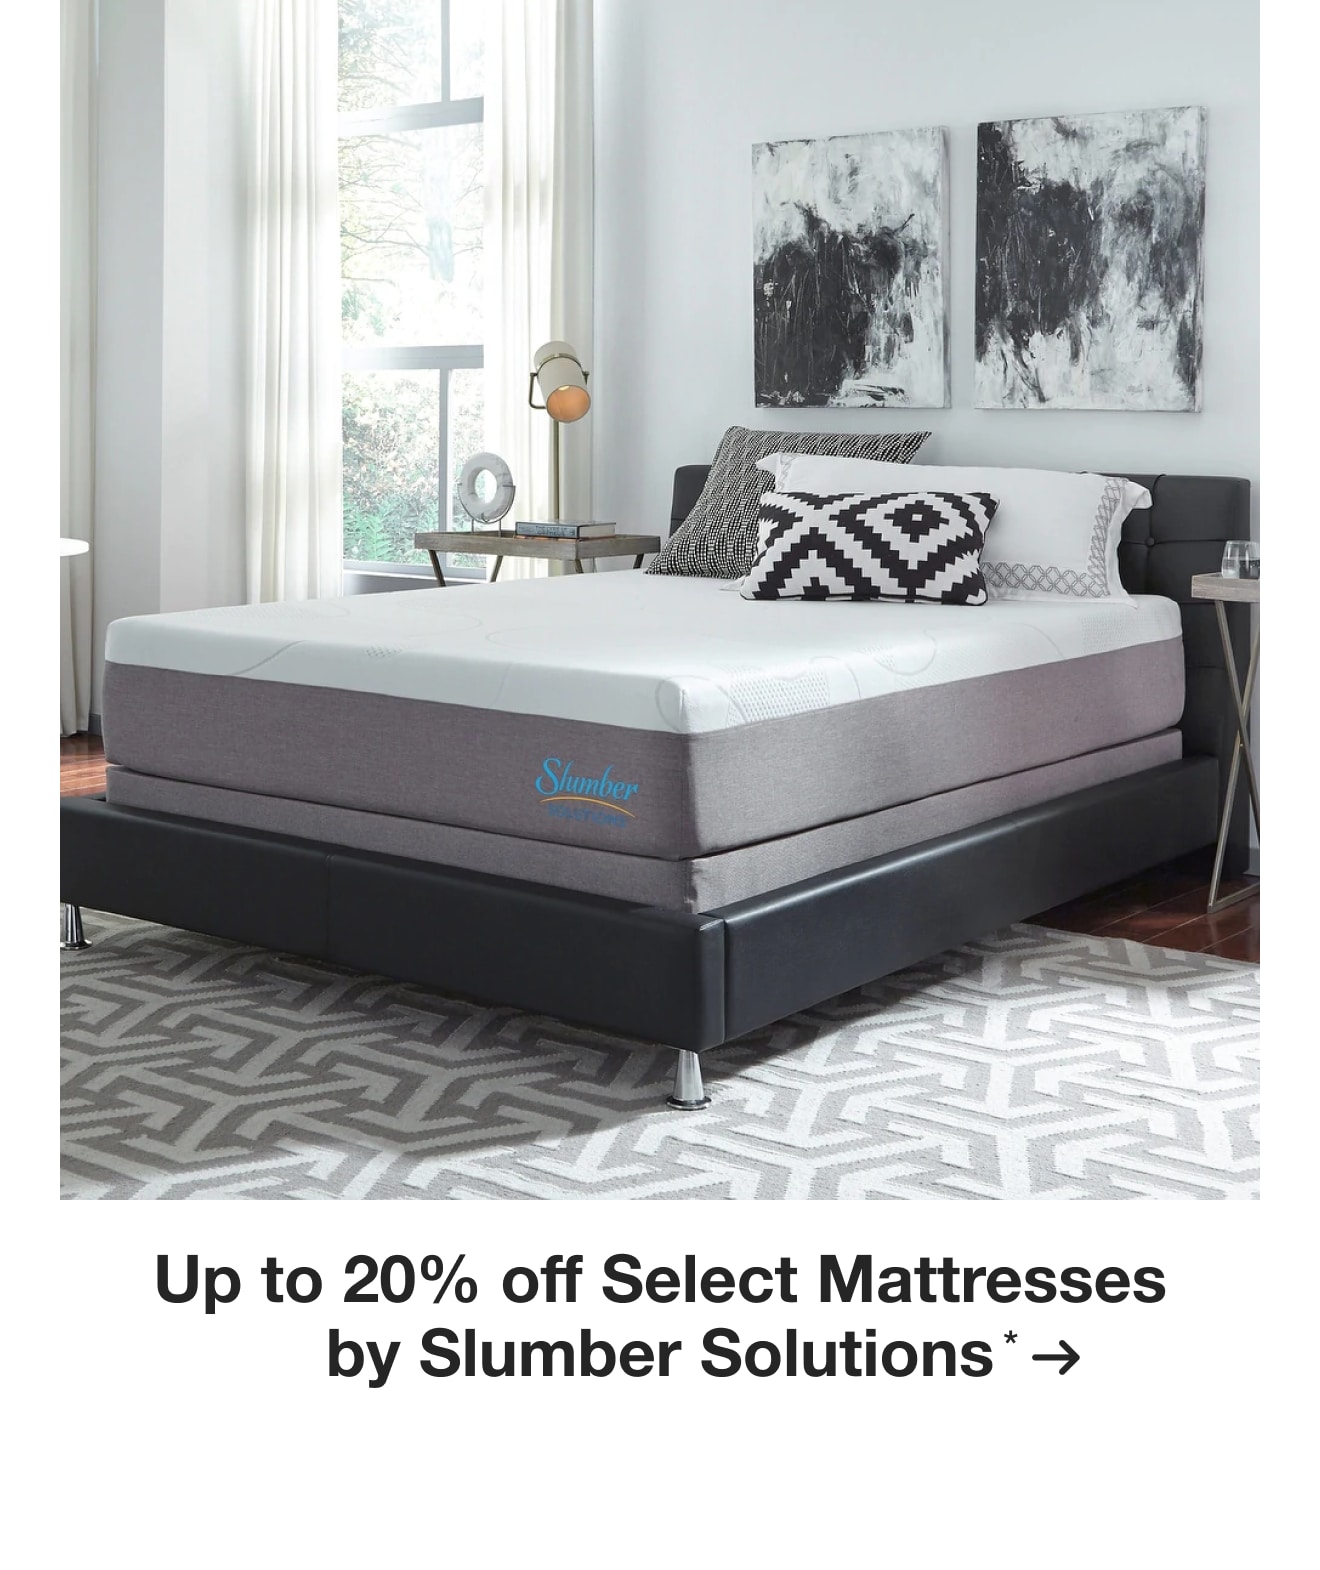 Up to 20% off Select Mattresses by Slumber Solutions*